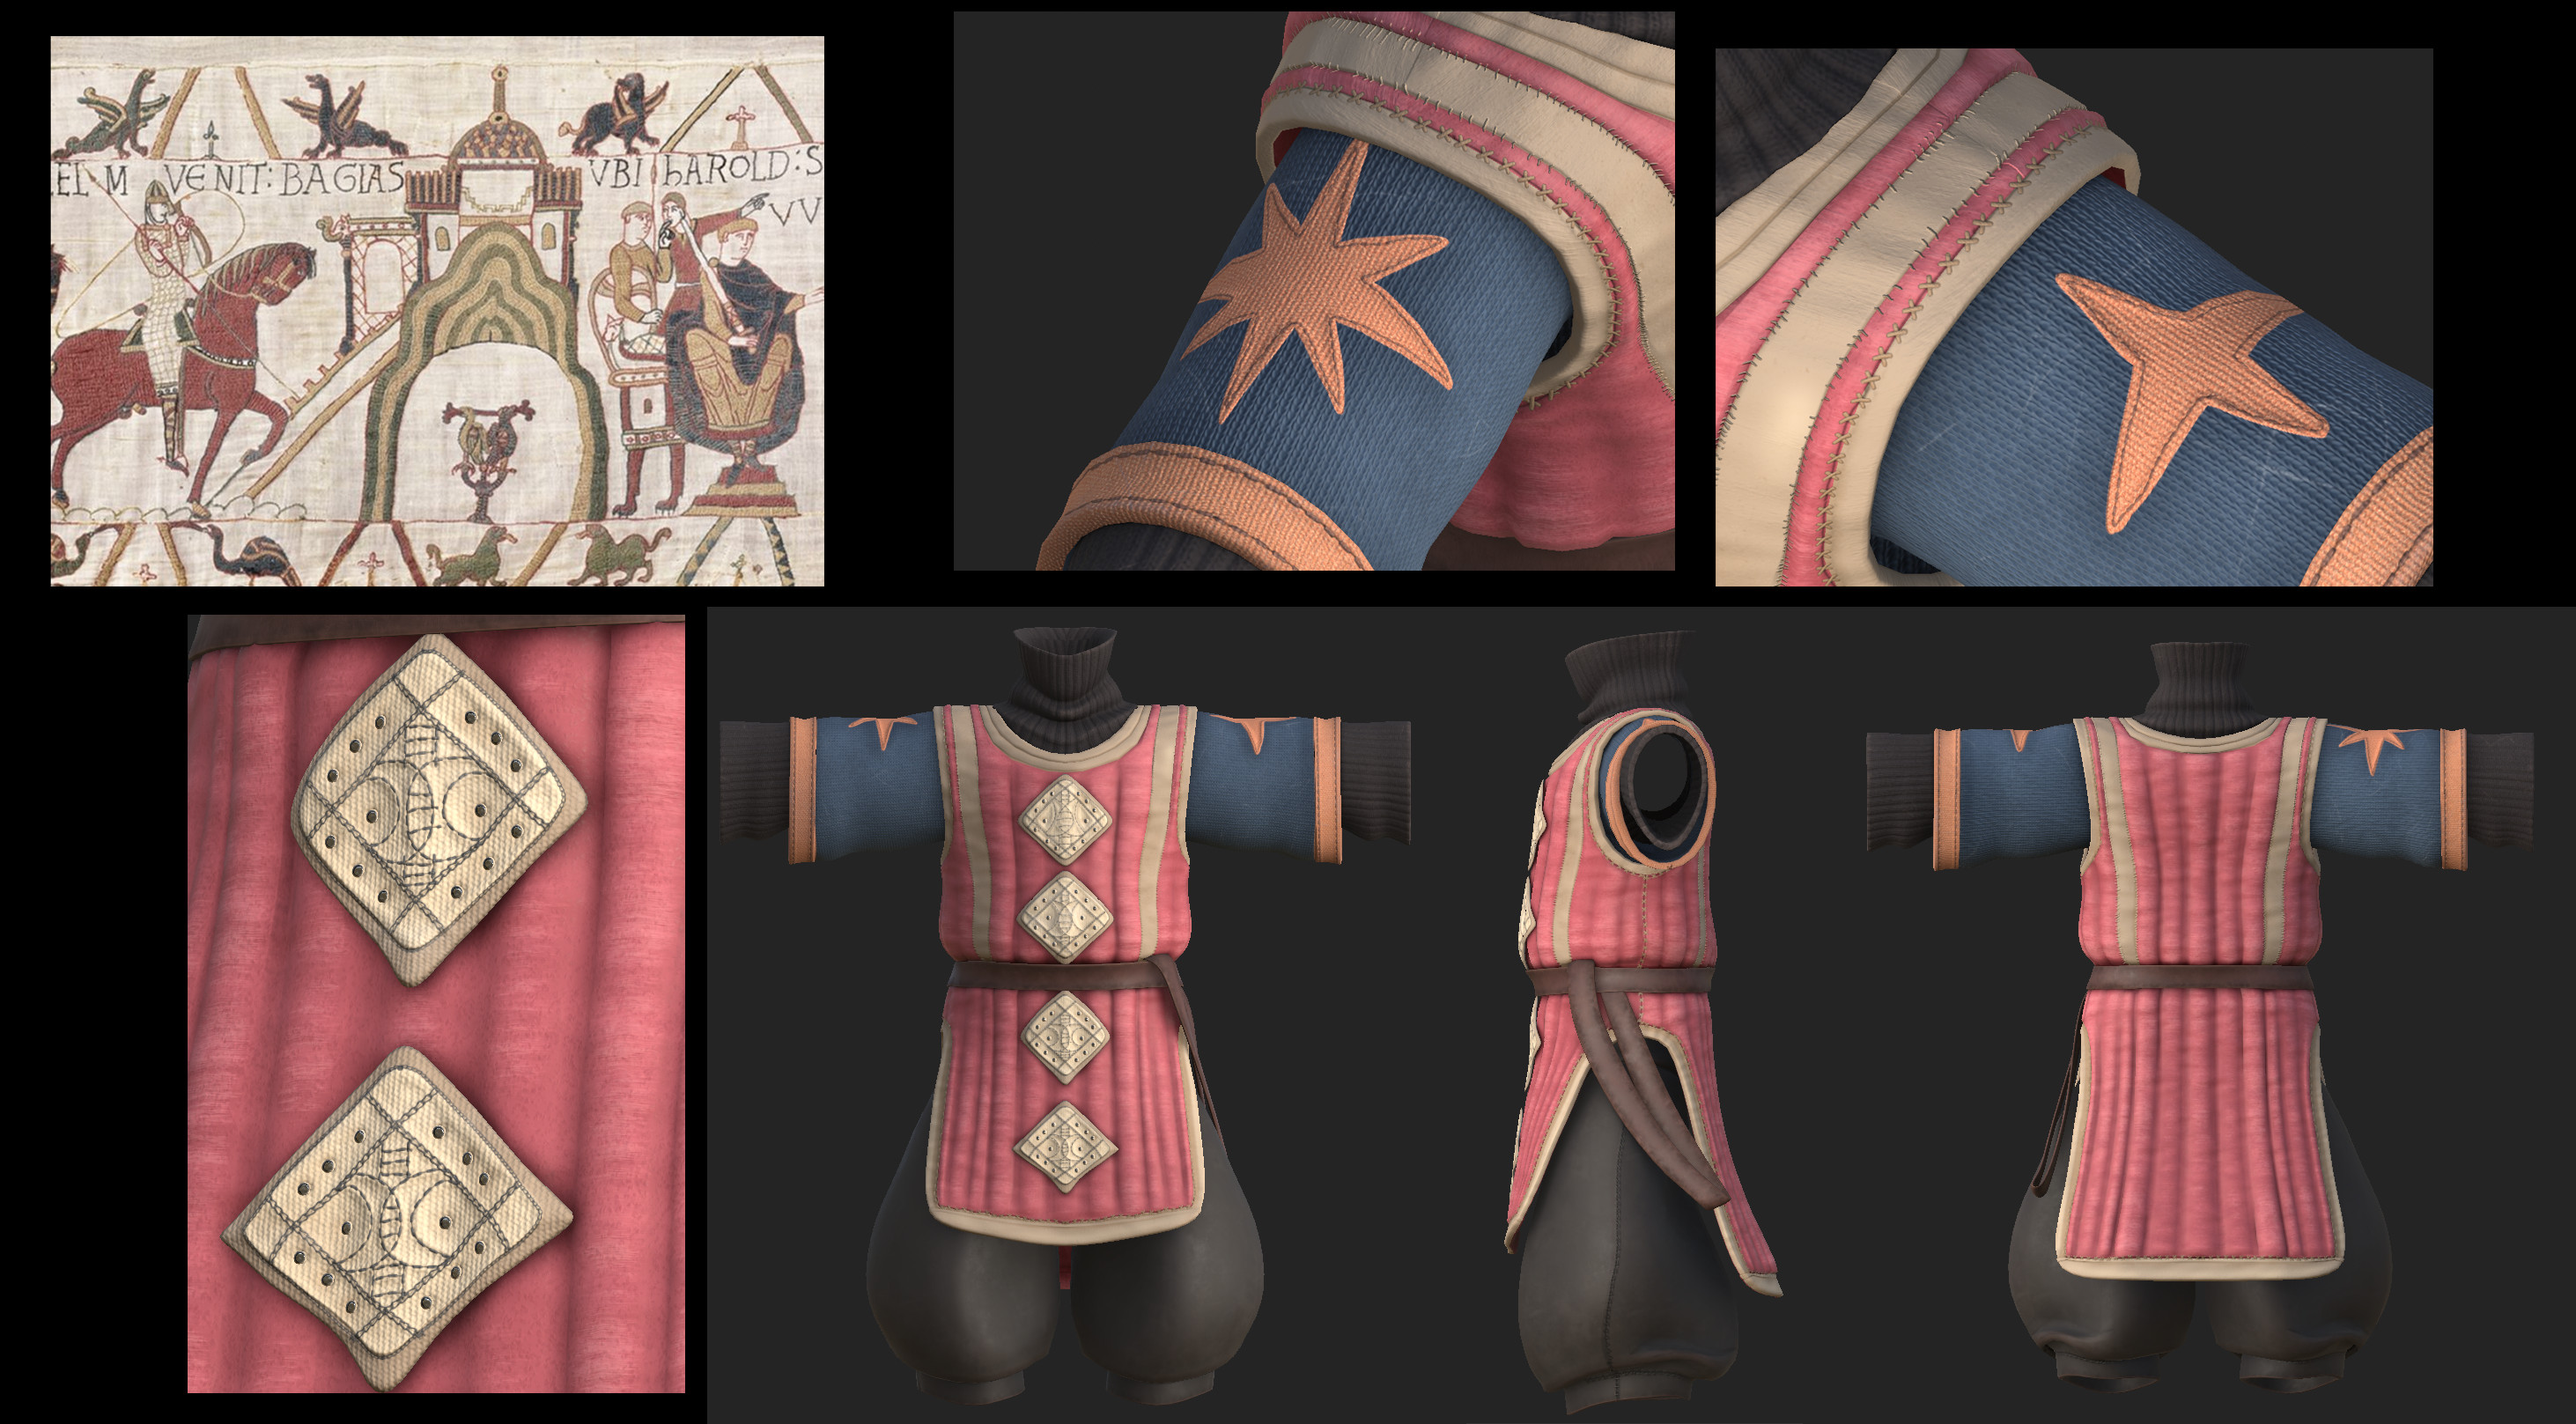 Details from Substance showing the parallels of the gambeson and the Bayeaux Tapestry.  I aimed for a blend of realism and stylization which really appeals to me.